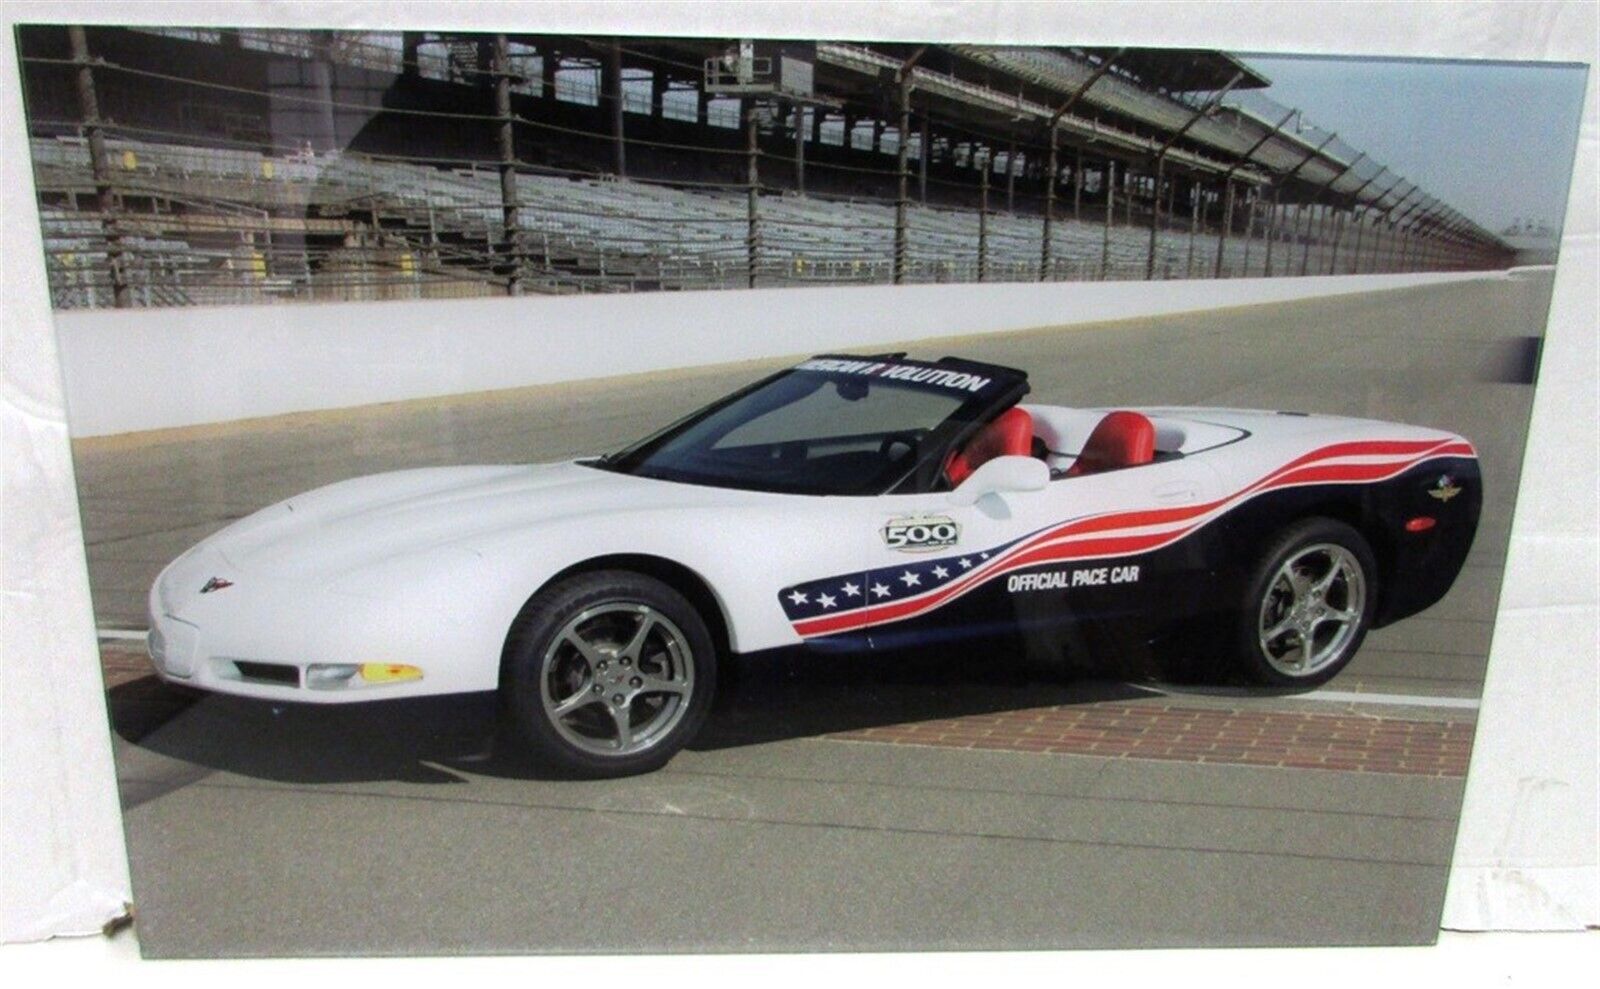 2004 Chevrolet Corvette C5 Indy 500 Pace Car Large Promotional Photo In Acrylic